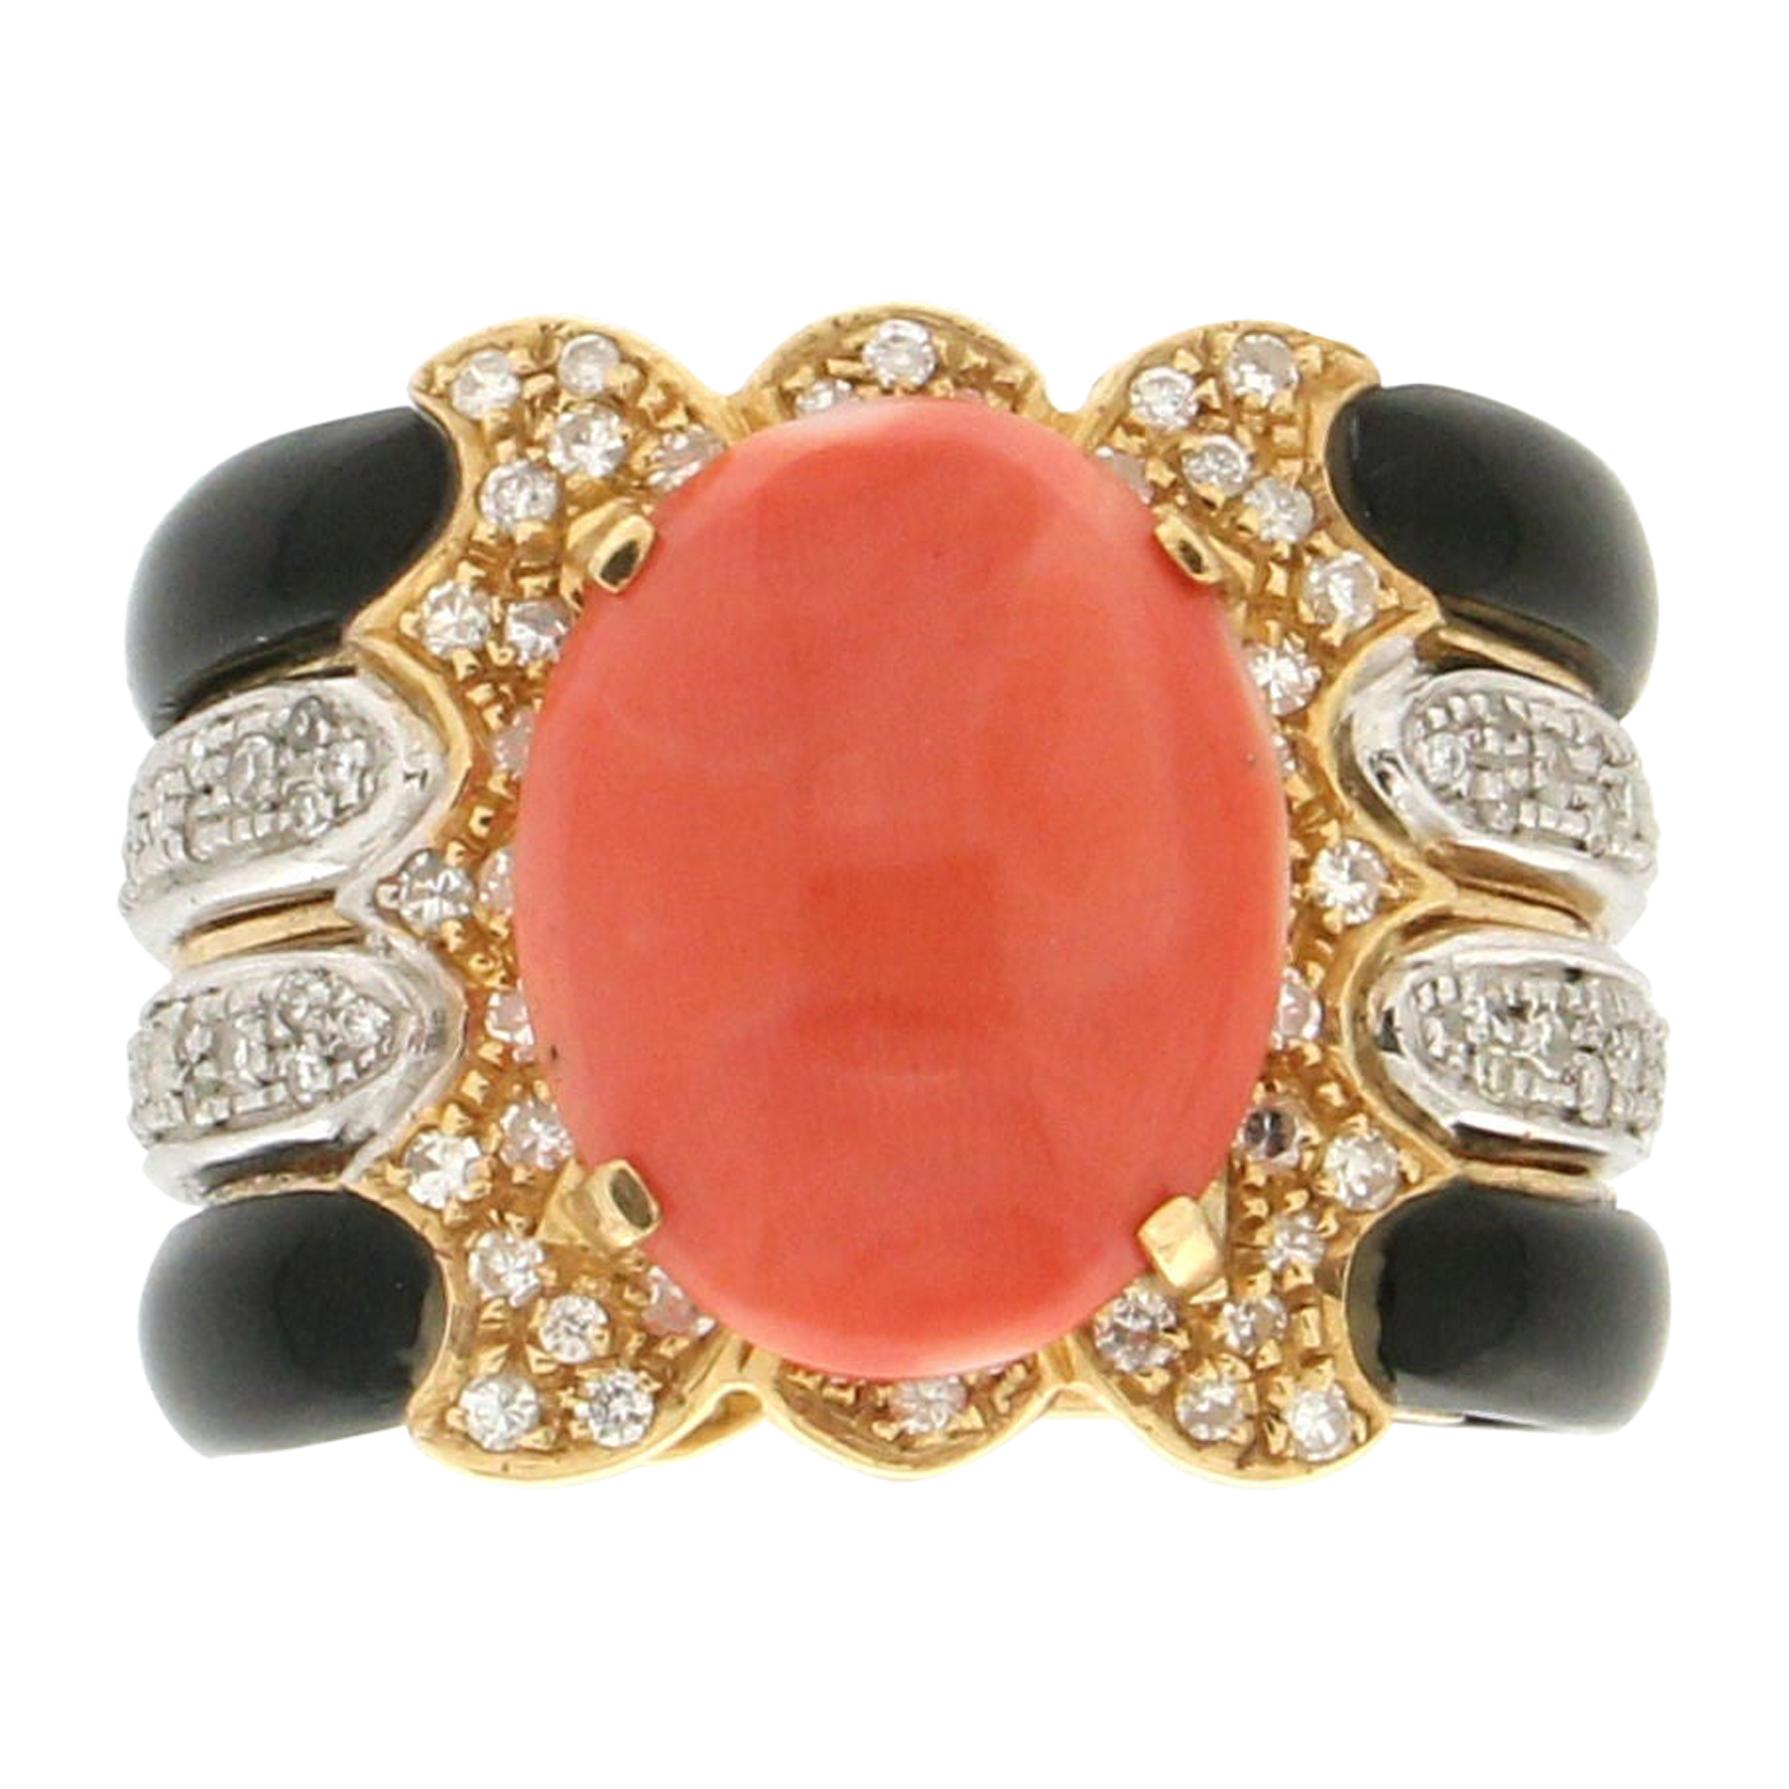 Handcraft Coral 18 Karat Yellow and White Gold Onyx Diamonds Cocktail Ring